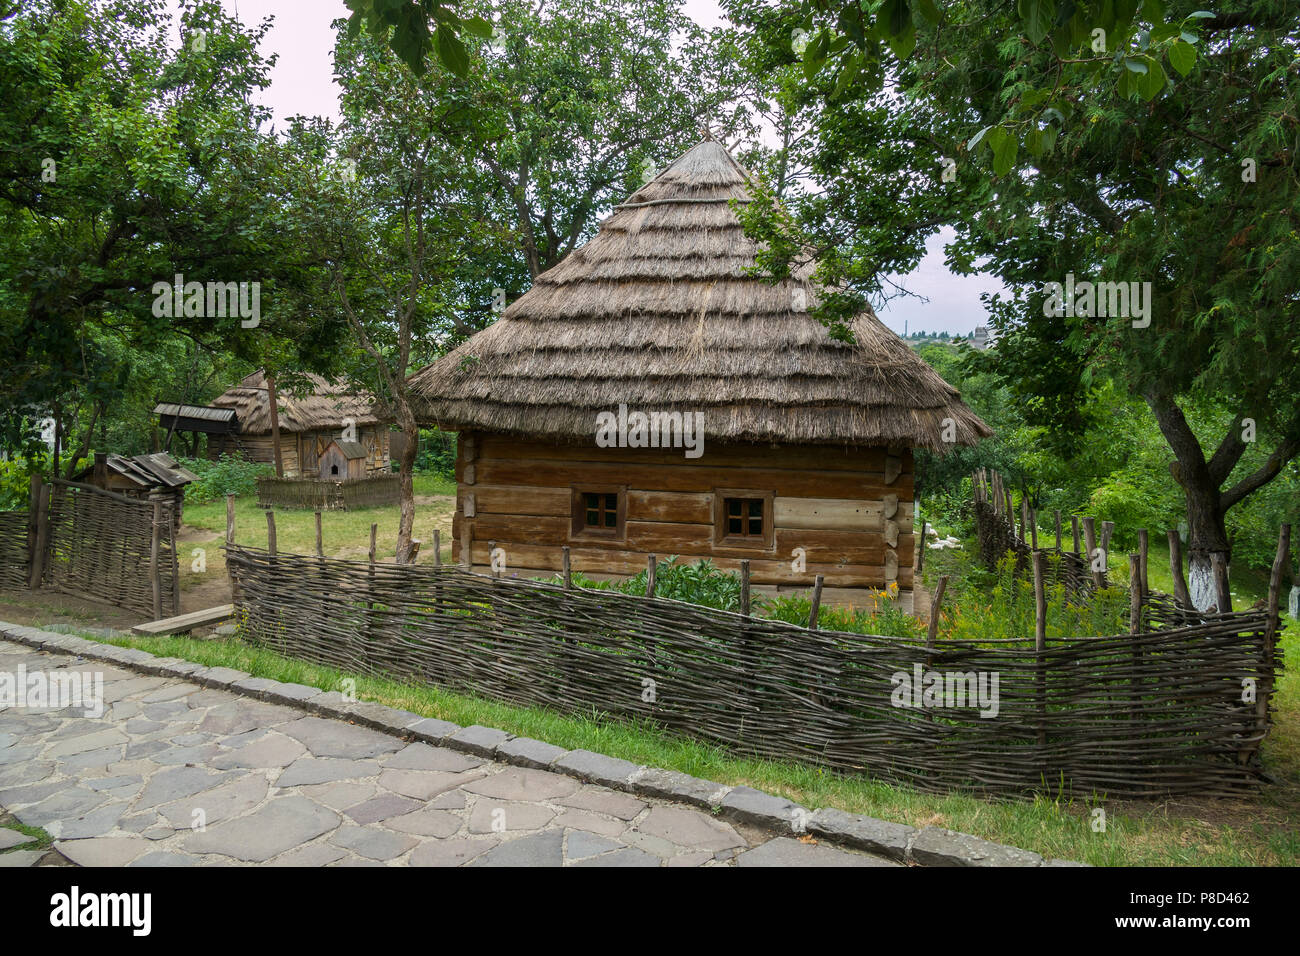 A rural house under a thatched roof with small windows in the wall behind a wattle fence in a picturesque area in the shade of a tree. . For your desi Stock Photo